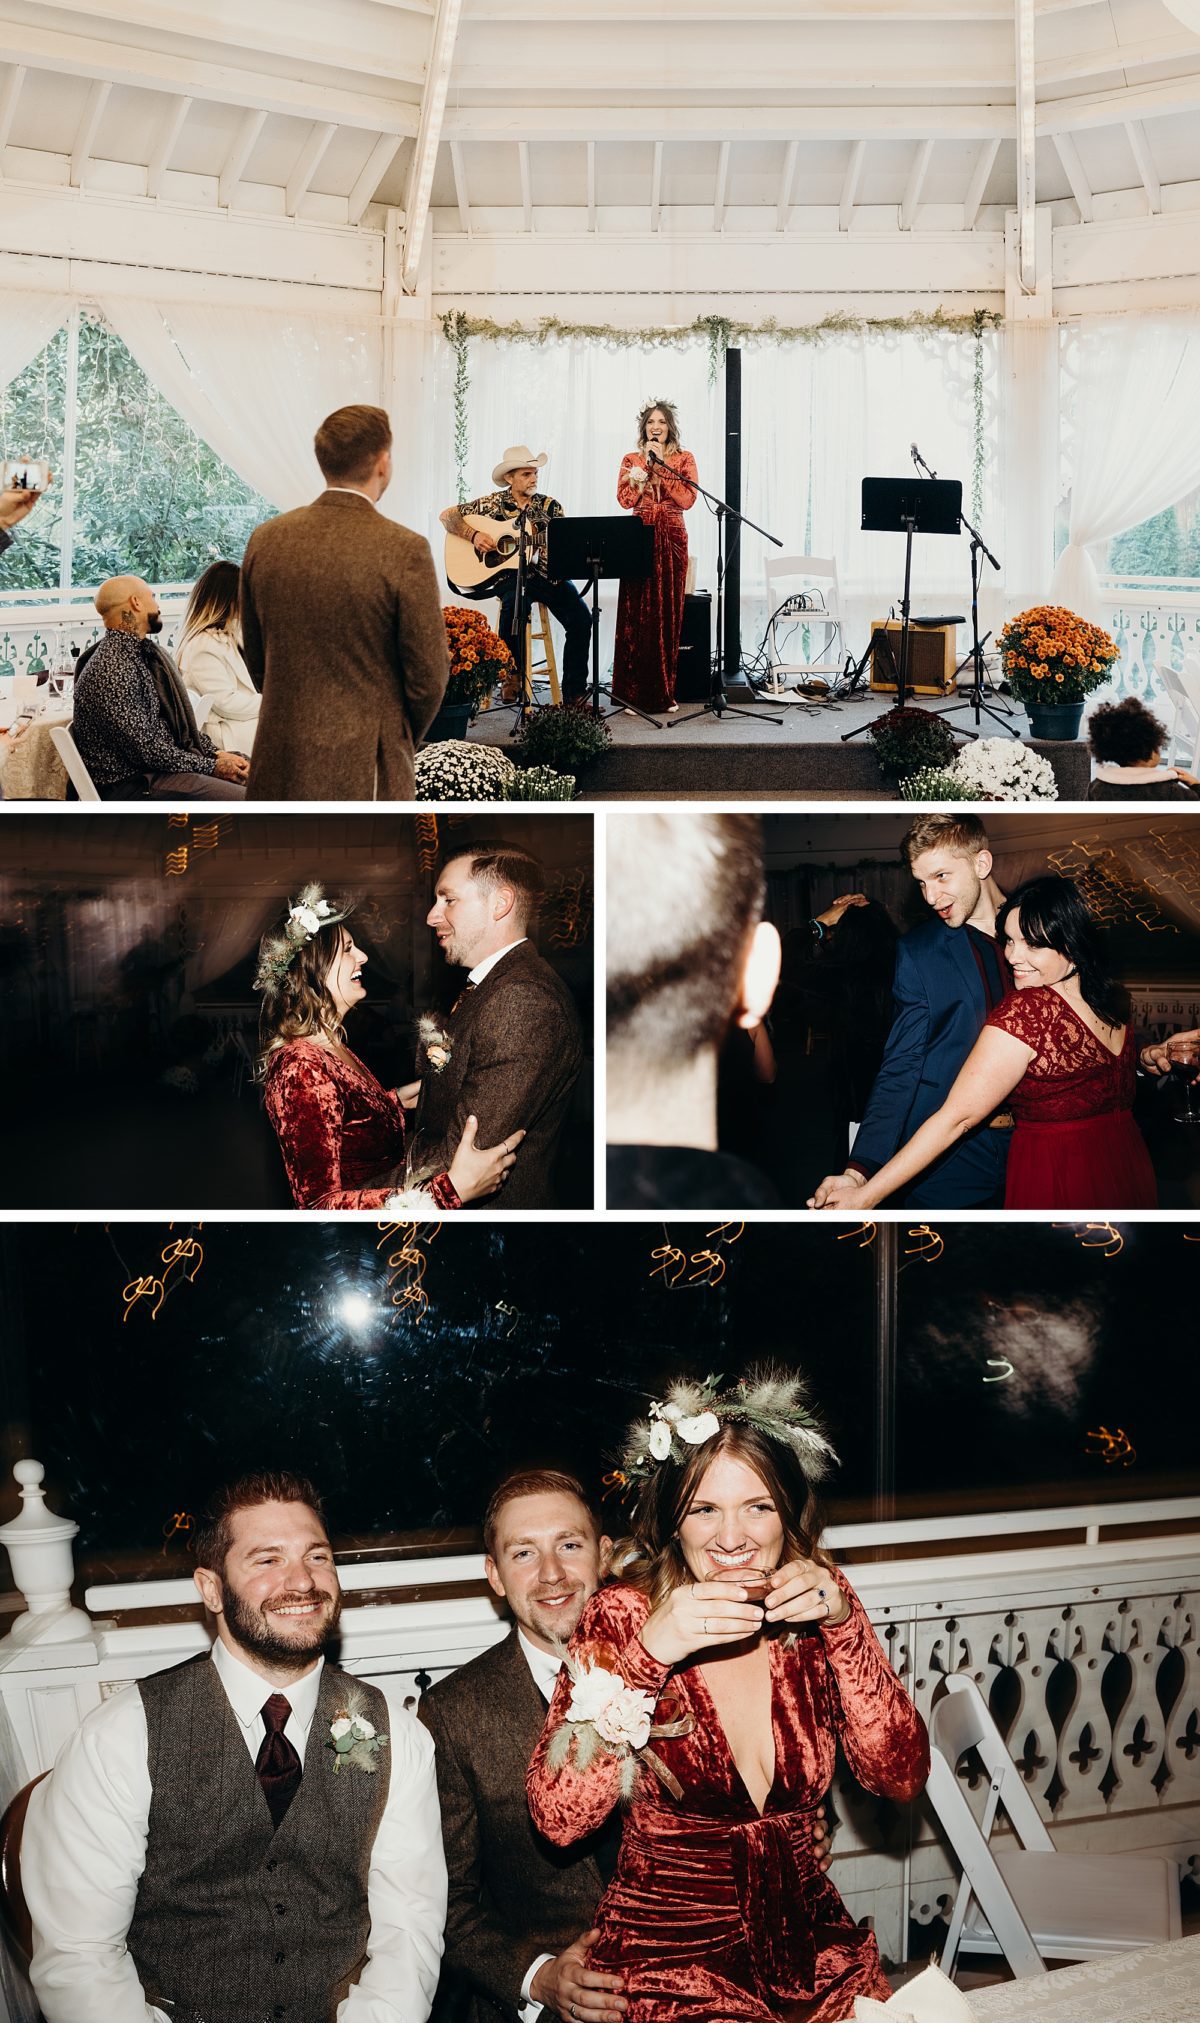 An indoor wedding reception at The Victorian Belle in Portland.